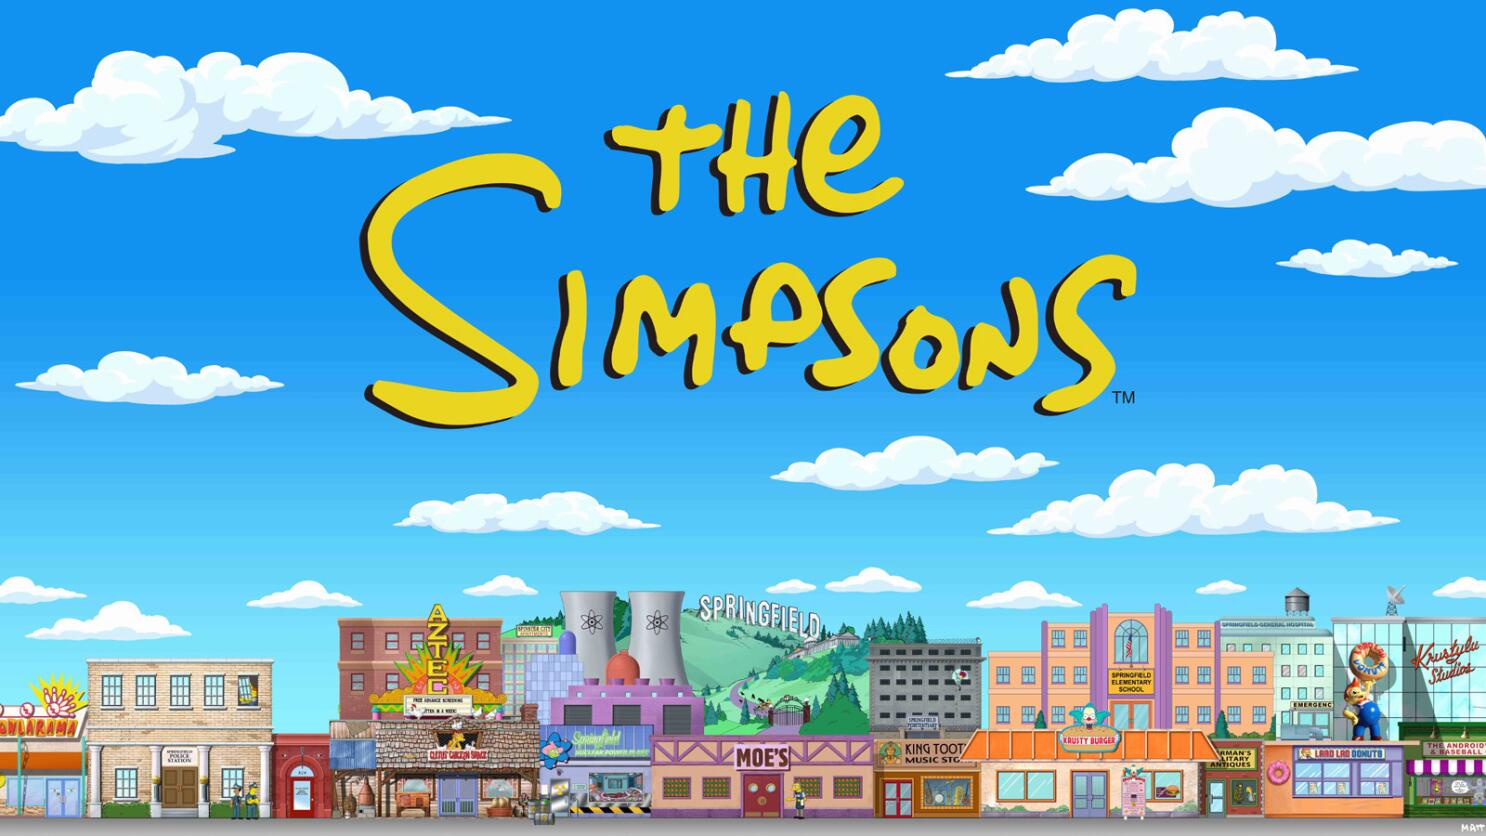 Live from 'The Simpsons' town of Springfield at Universal Studios